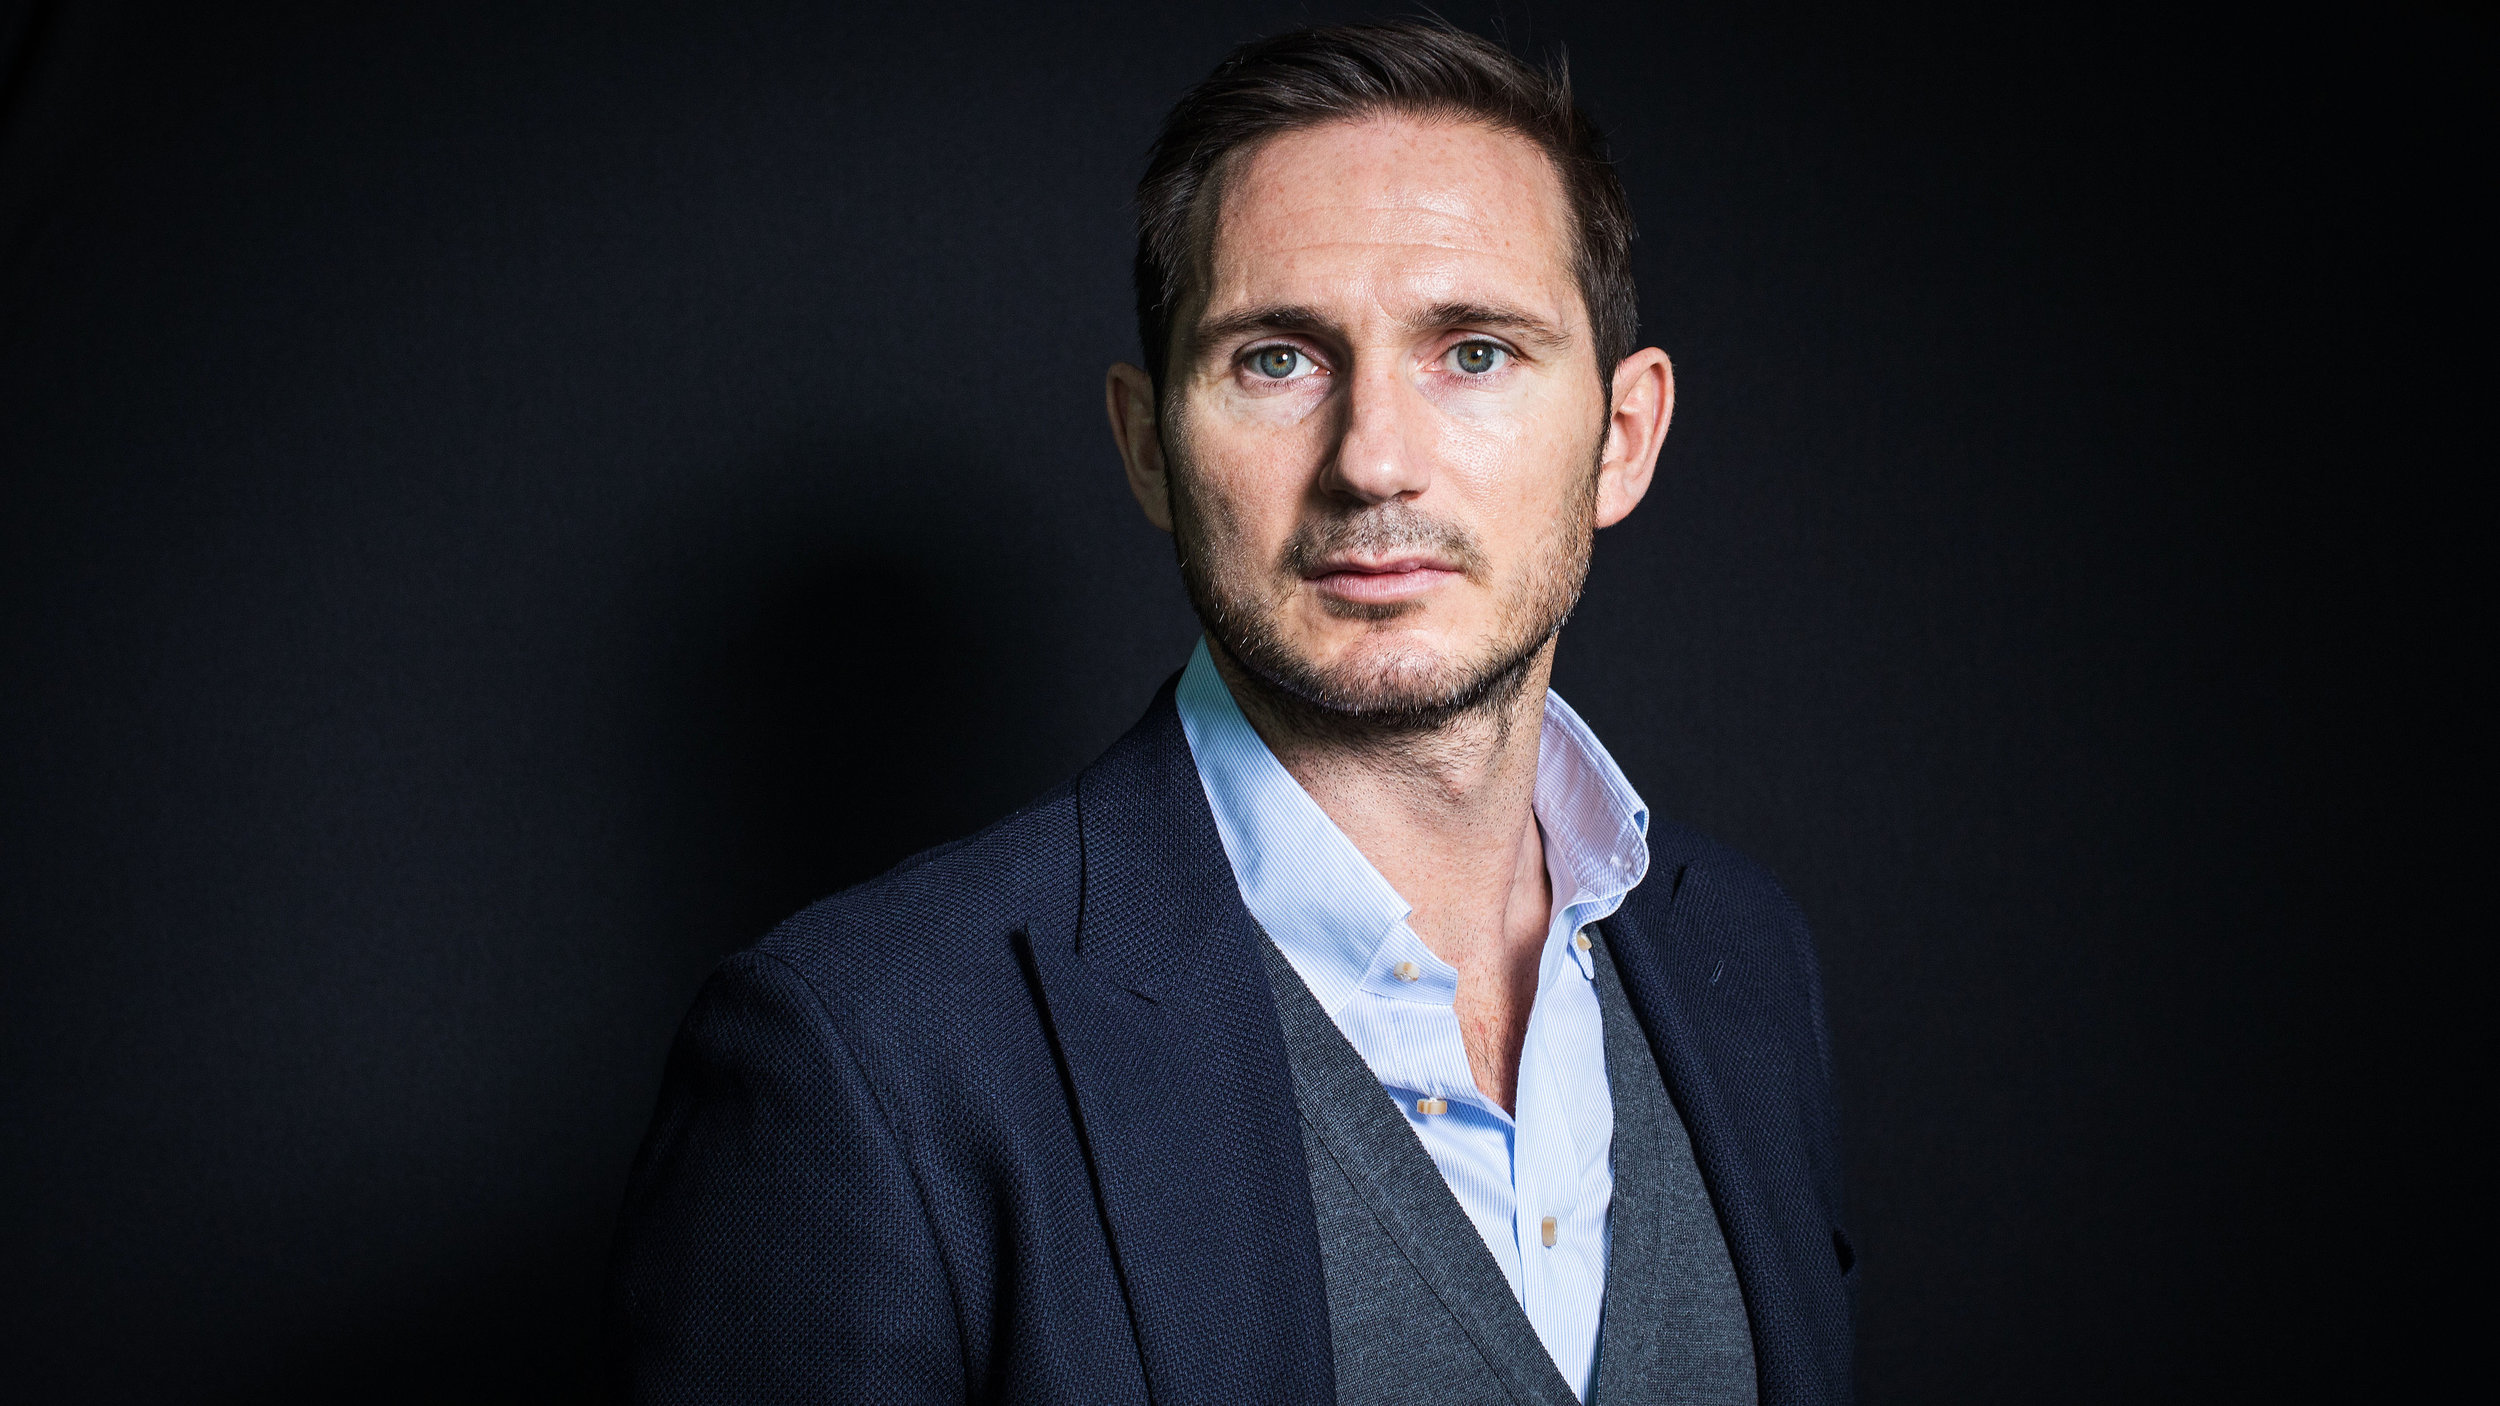  We sat down with former England footballer Frank Lampard as part of our Leading Questions series 